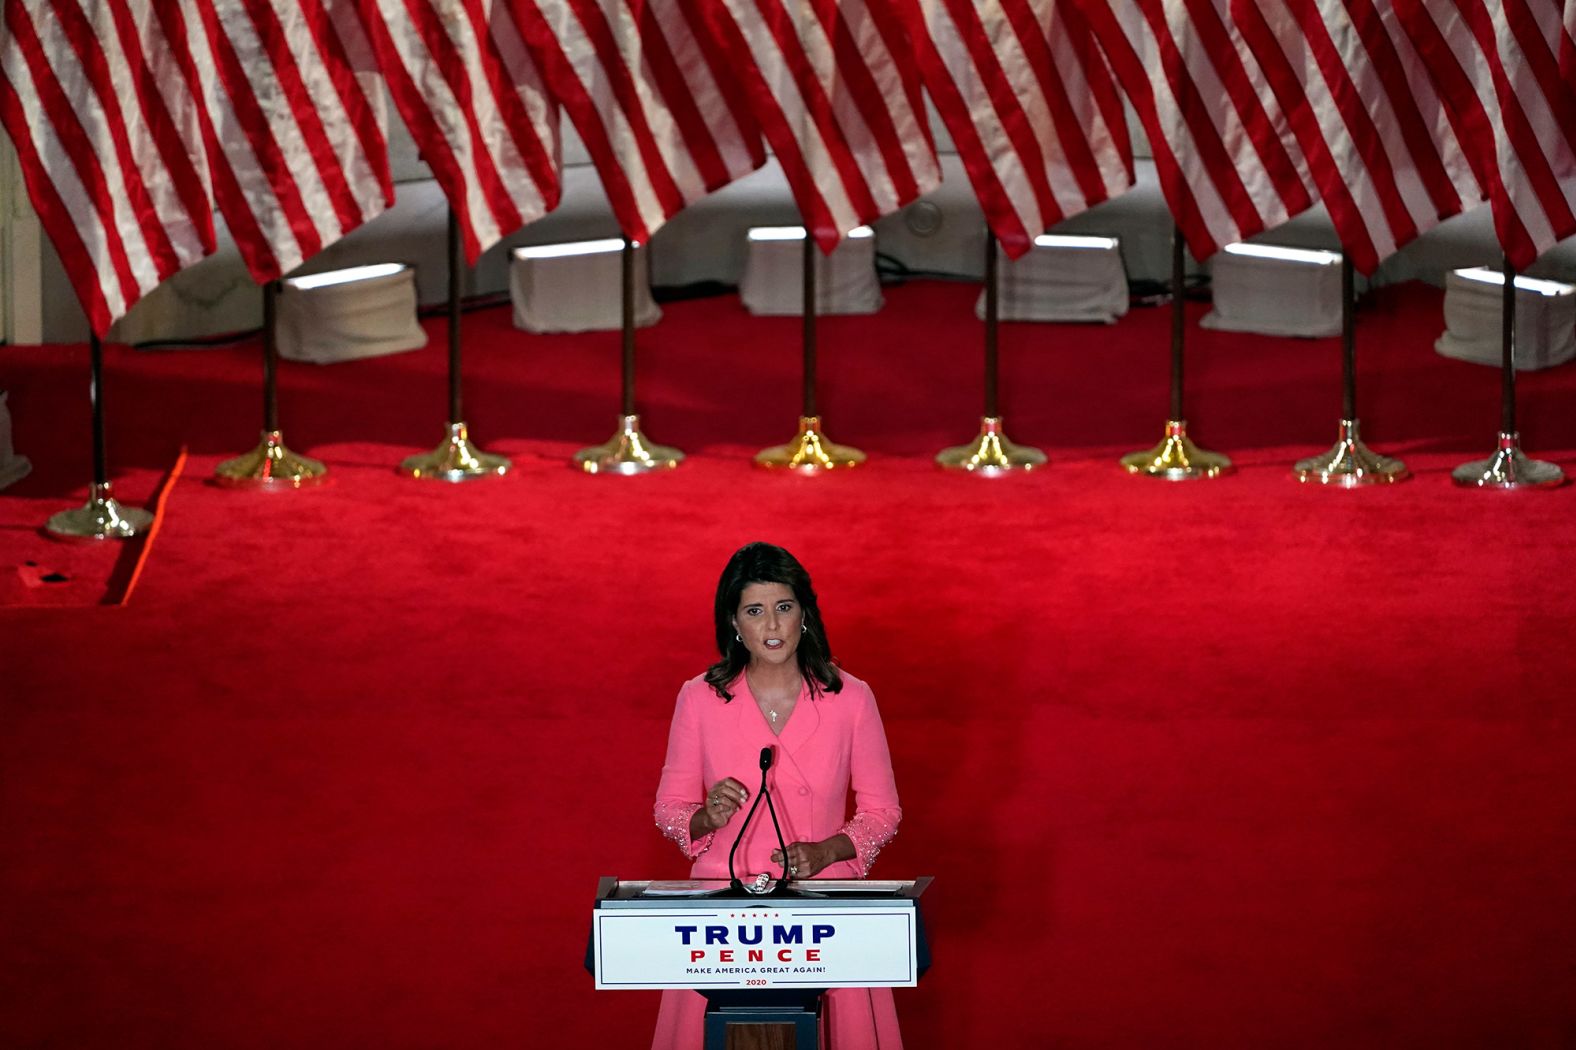 Former UN Ambassador Nikki Haley gives a prime-time speech Monday. <a href="https://www.cnn.com/politics/live-news/rnc-2020-day-1/h_e55c6399af1fc20d68c3f35d924b01fe" target="_blank">Haley sought to demonstrate Trump's leadership around the world,</a> saying he has been tough against North Korea, Iran and China. She praised Trump for passing sanctions on North Korea and said he "ripped up the Iran nuclear deal."